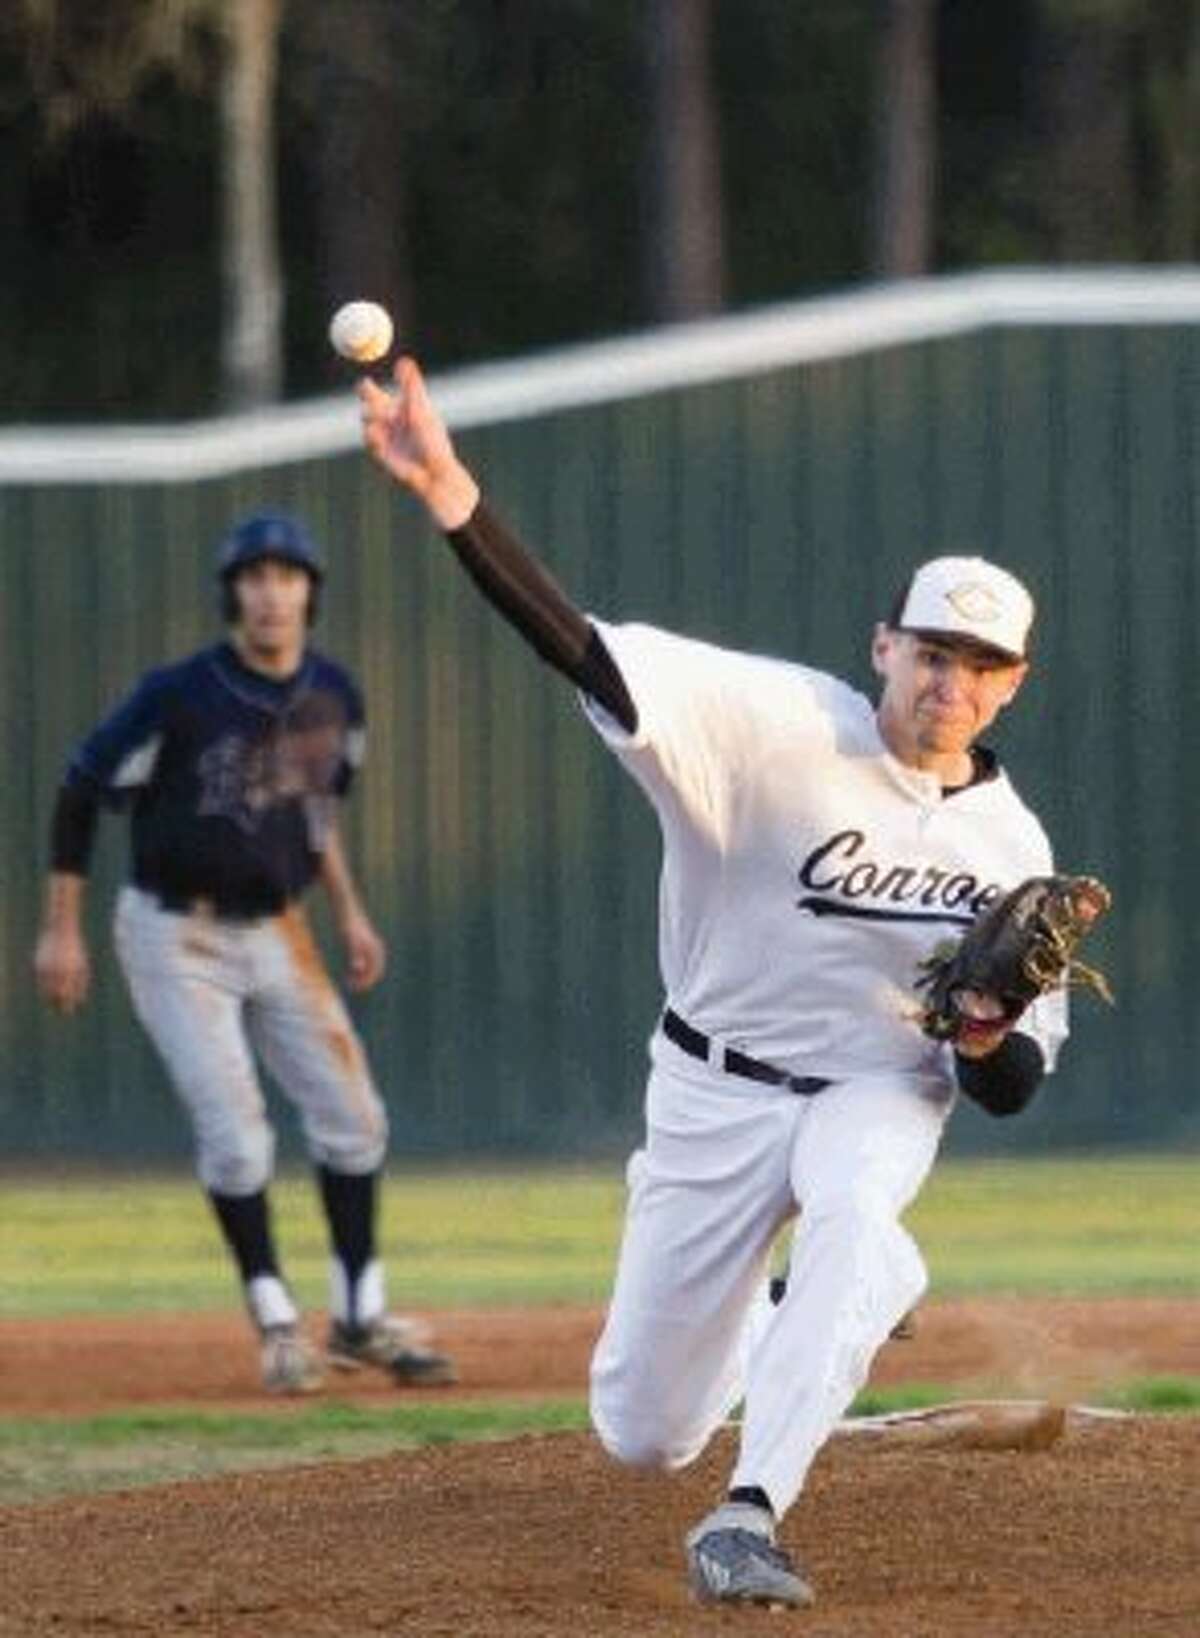 Conroe’s Jordan Fisher pitches against Bryan on Thursday night at Ferrell Park at Elmore Field. To view or purchase this photo and others like it, visit HCNpics.com.